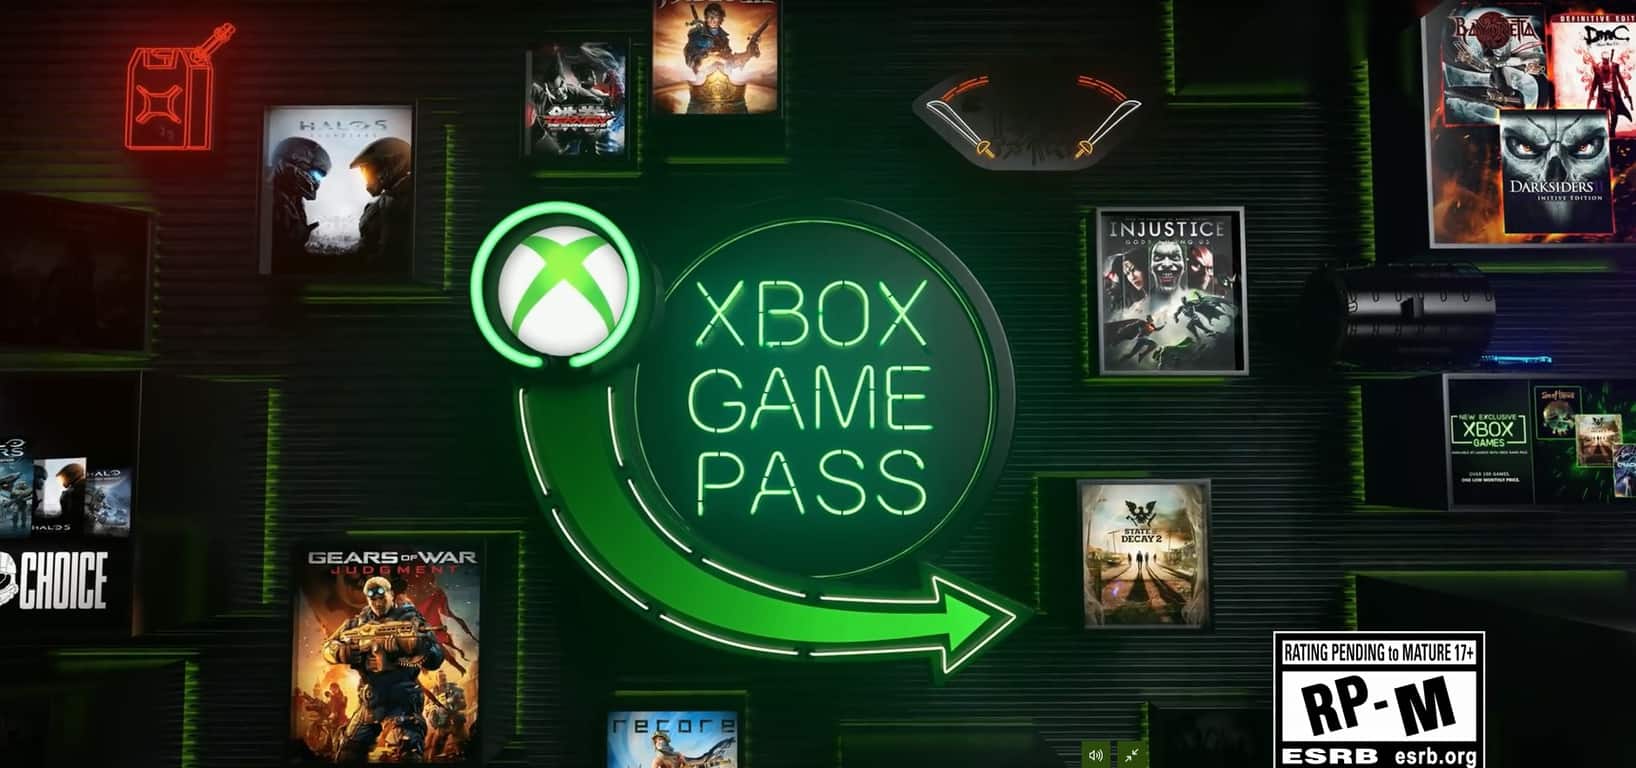 Microsoft has a hit on its hands with Xbox Game Pass, and analysts are starting to notice - OnMSFT.com - October 31, 2018